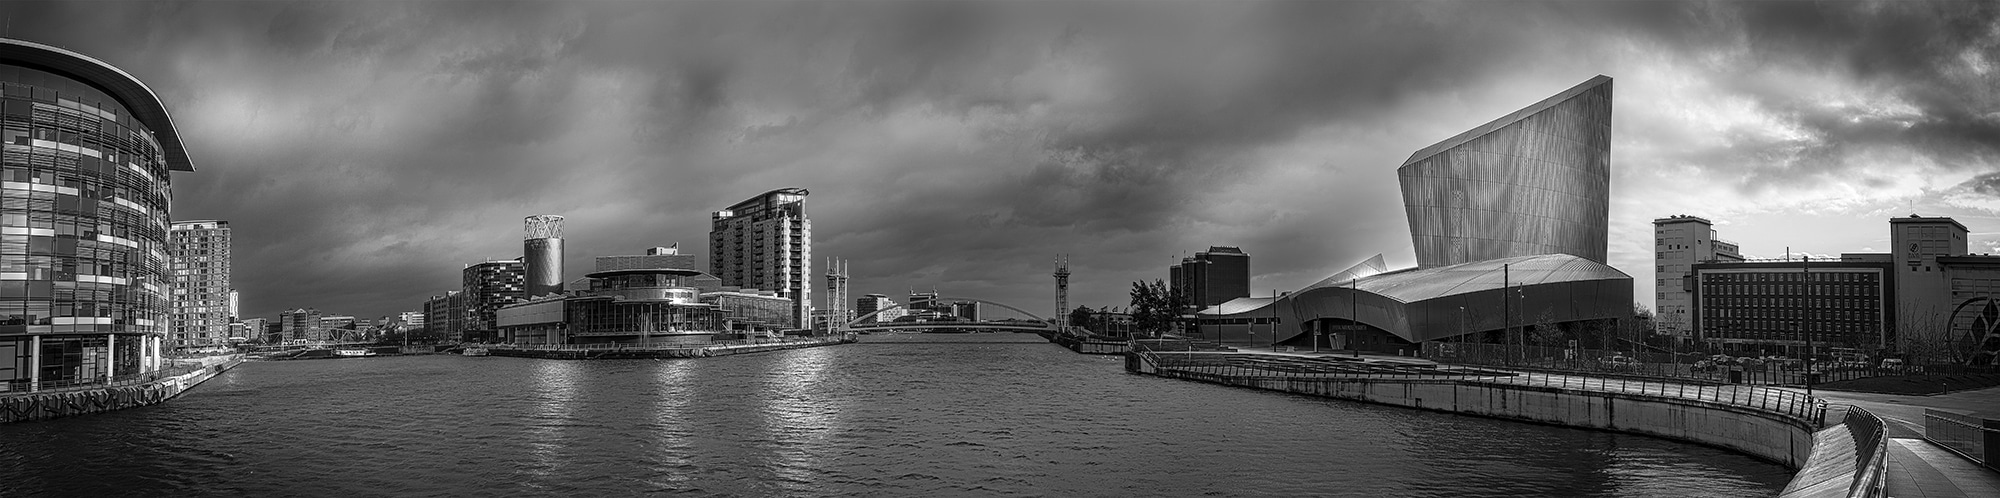 Salford Quays Panoramic Skyline Black & White Manchester Landscapes Architecture